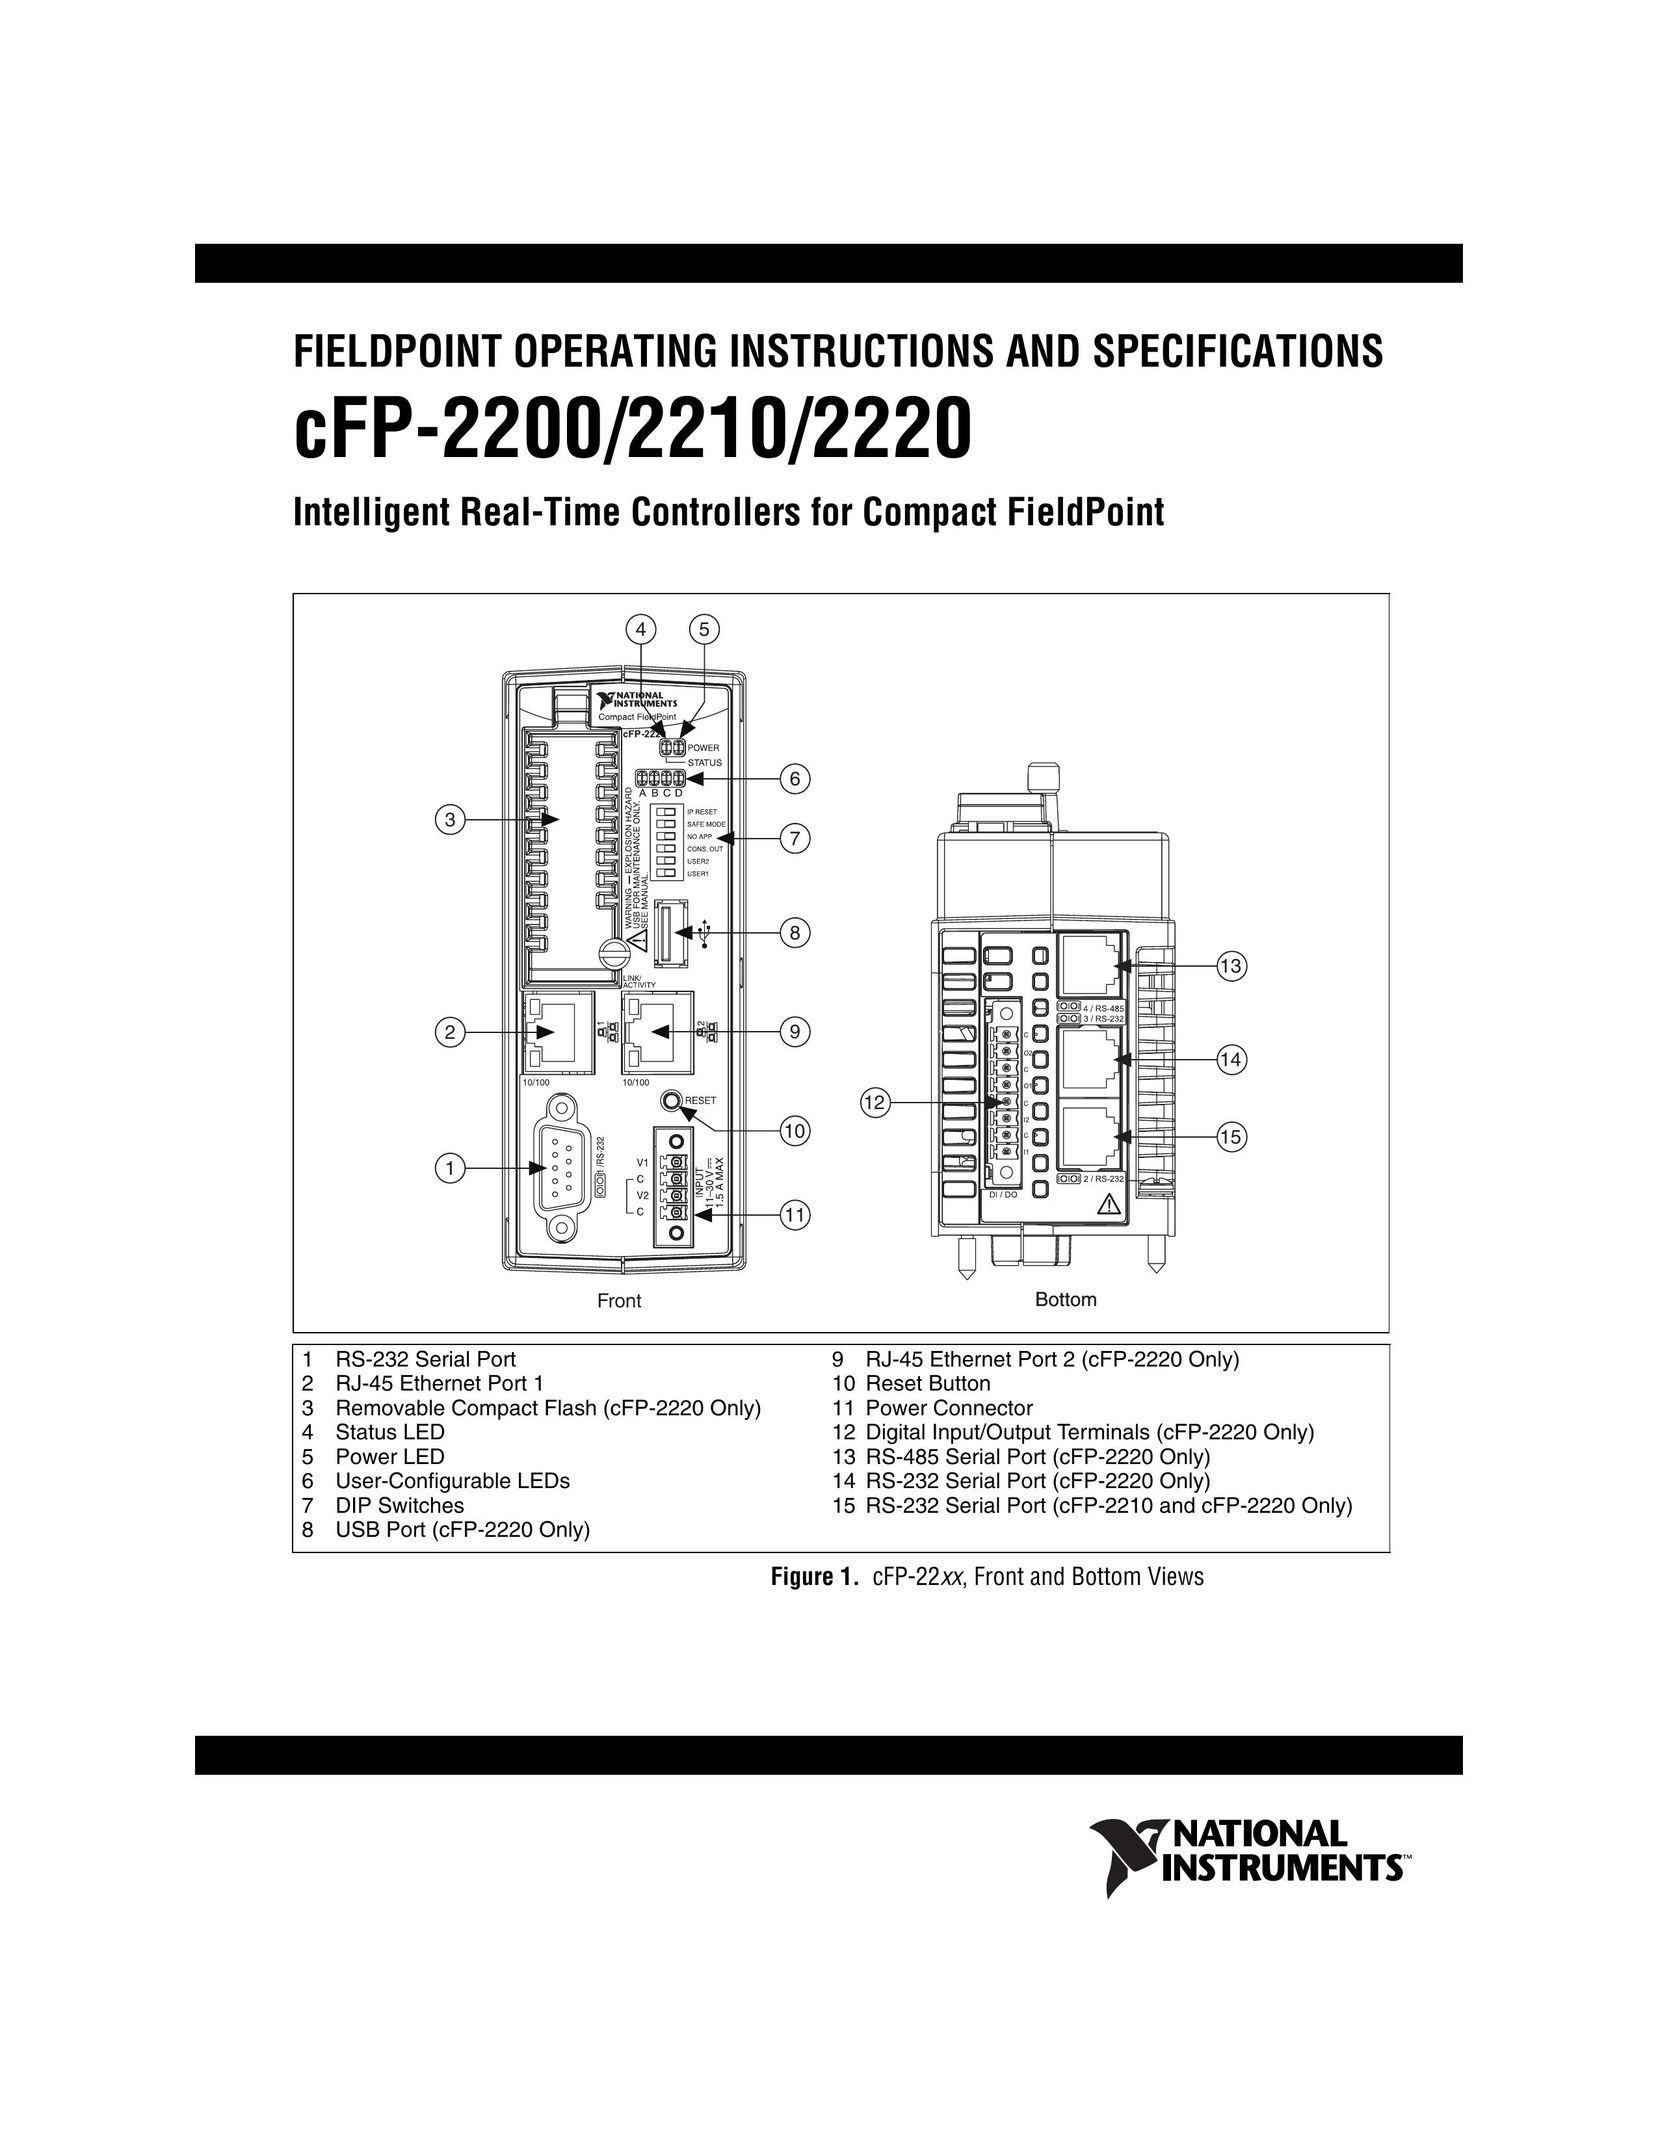 National Instruments CFP-2200 Network Card User Manual